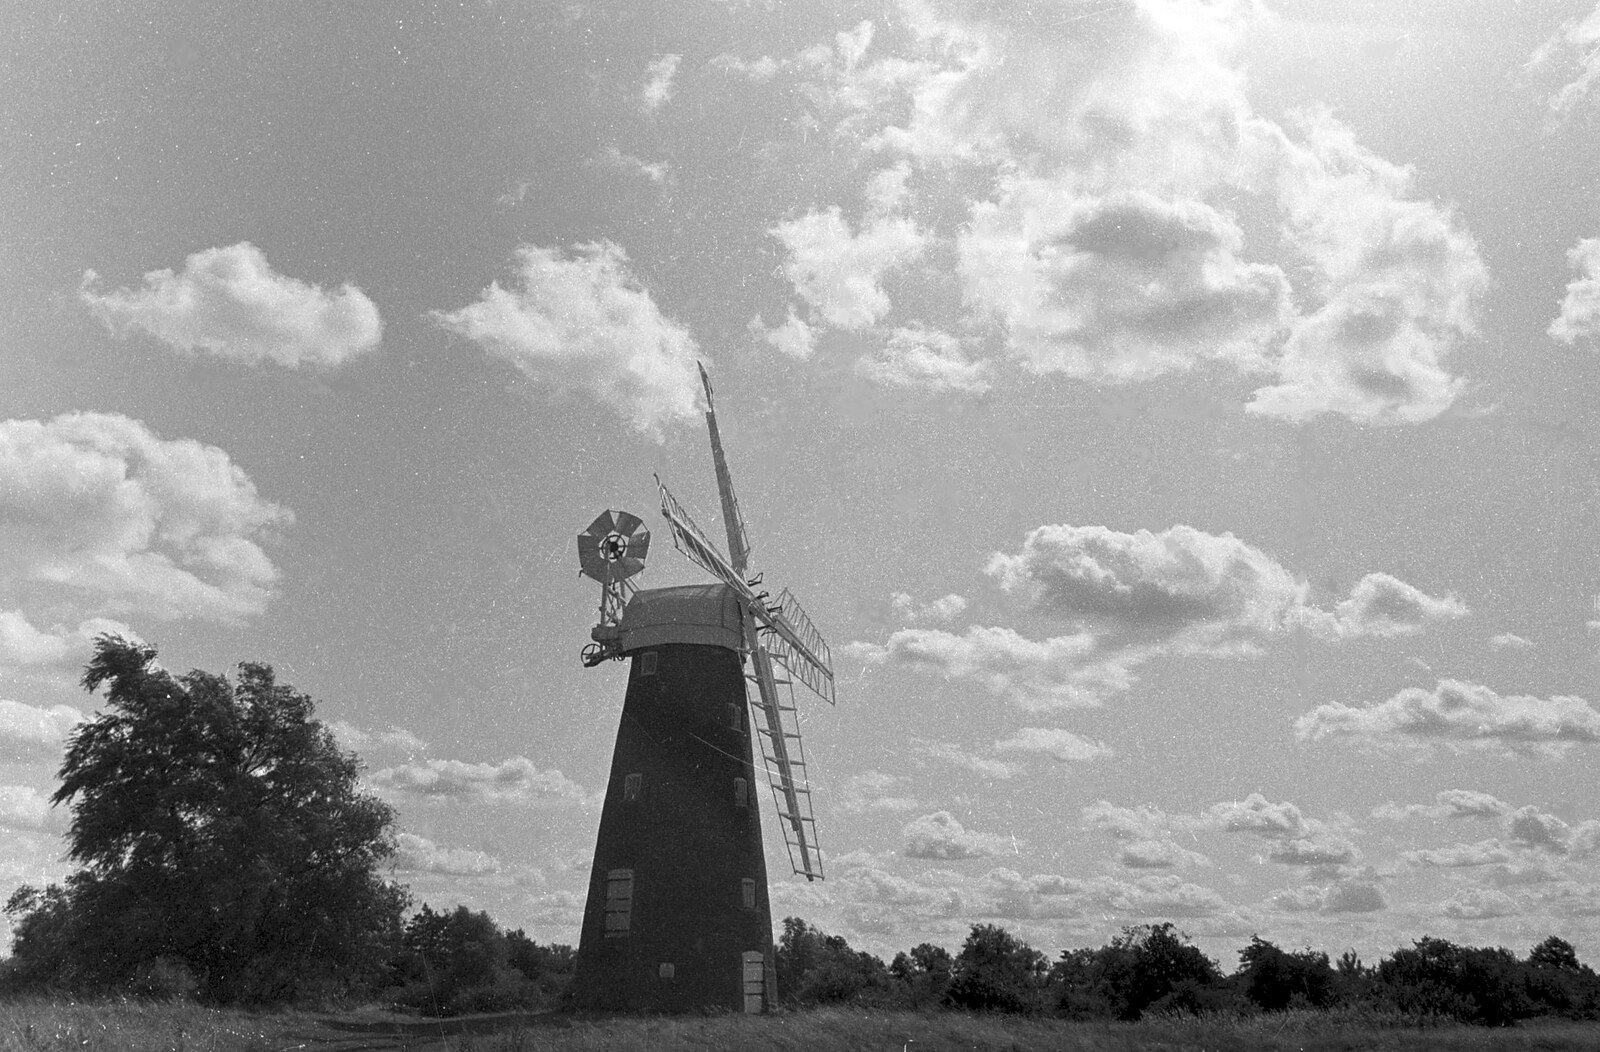 Billingford windmill and the heath from A Black and White Life in Concrete, Stuston, Suffolk - 3rd September 1992